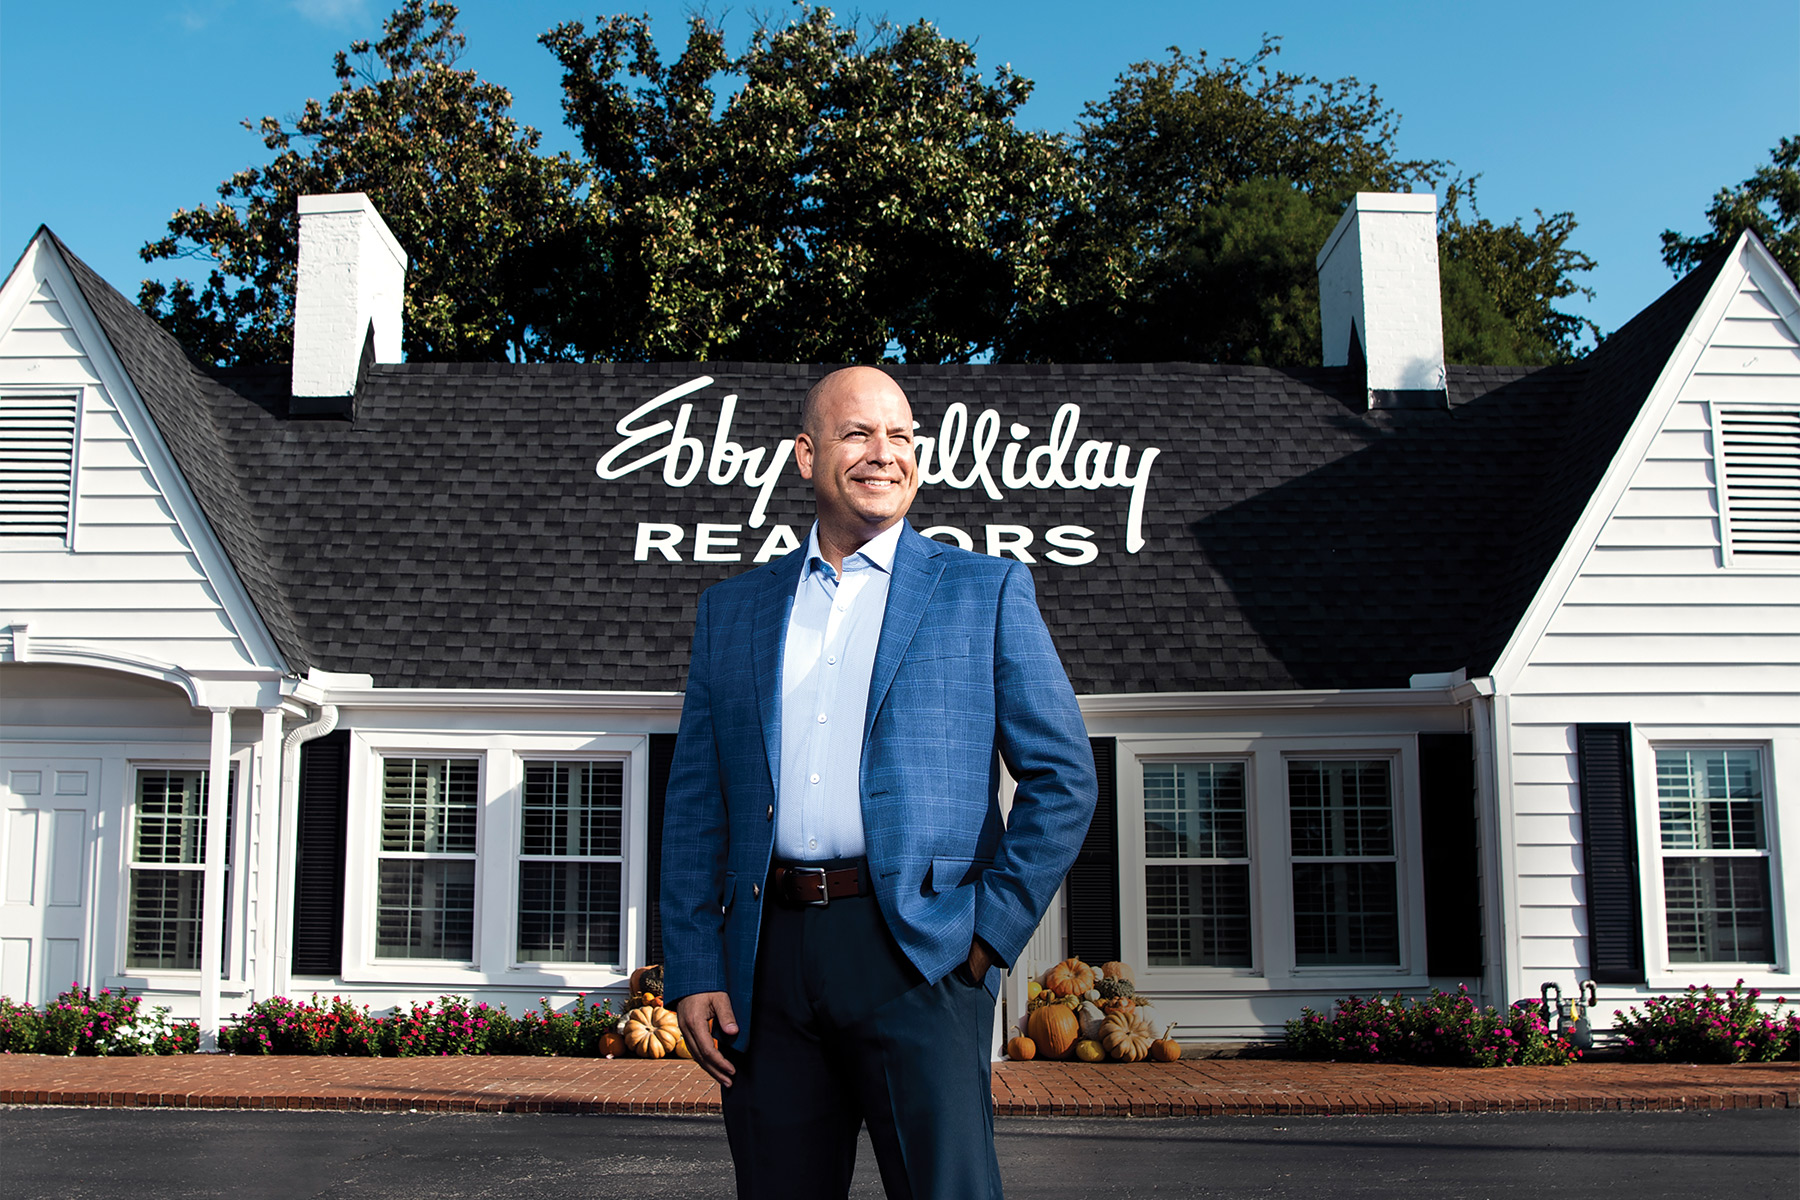 Chris Kelly, CEO and President of Ebby Halliday companies